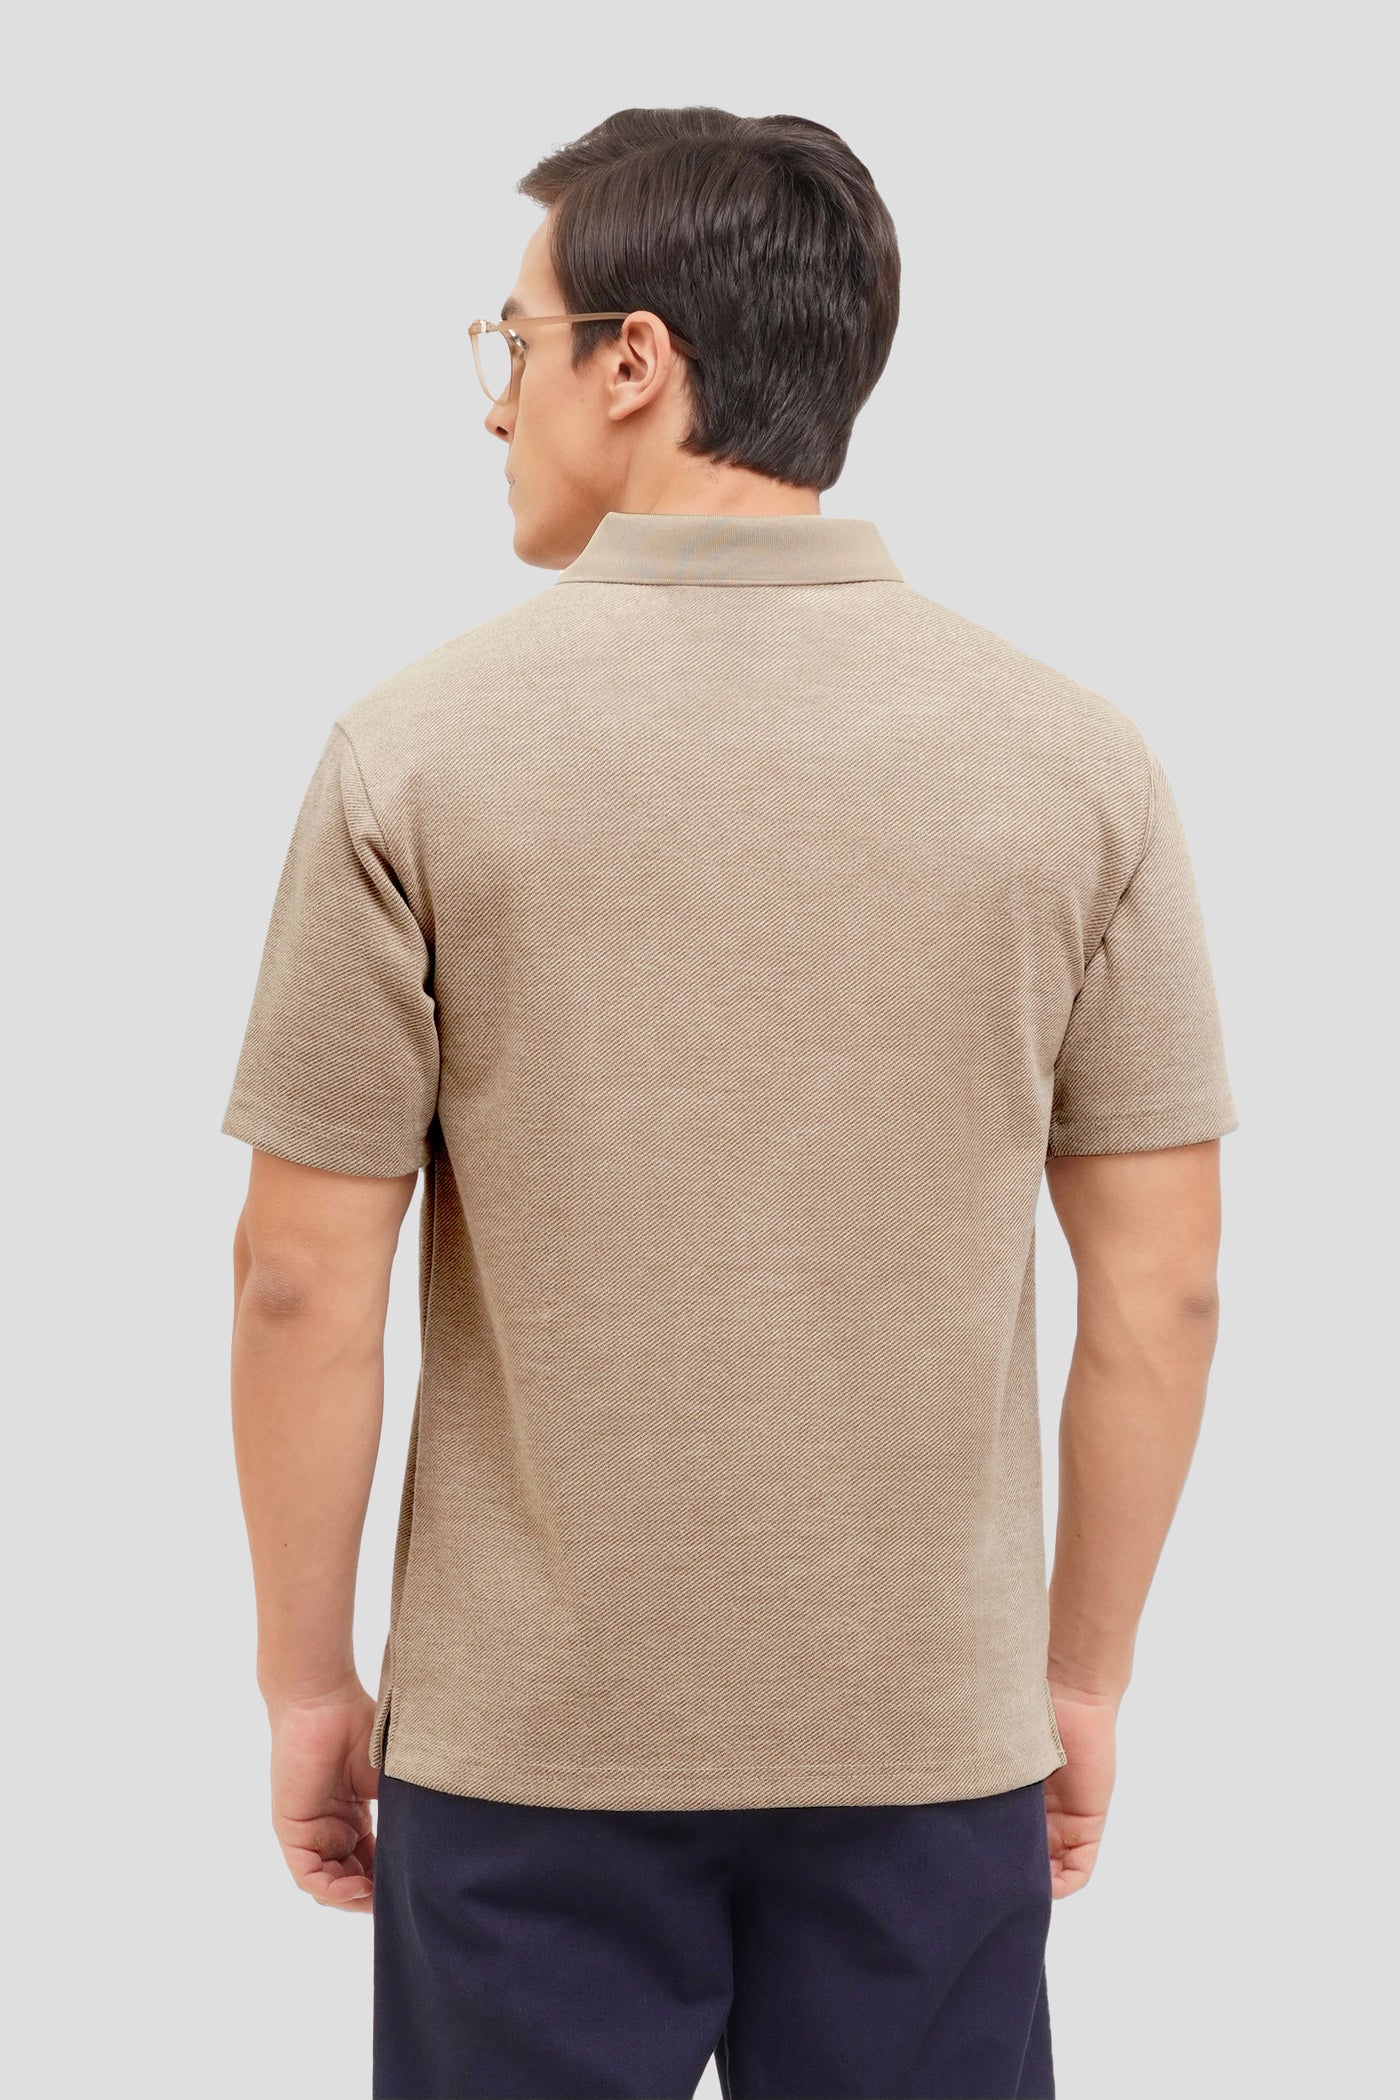 Boxy Fit Textured Polo